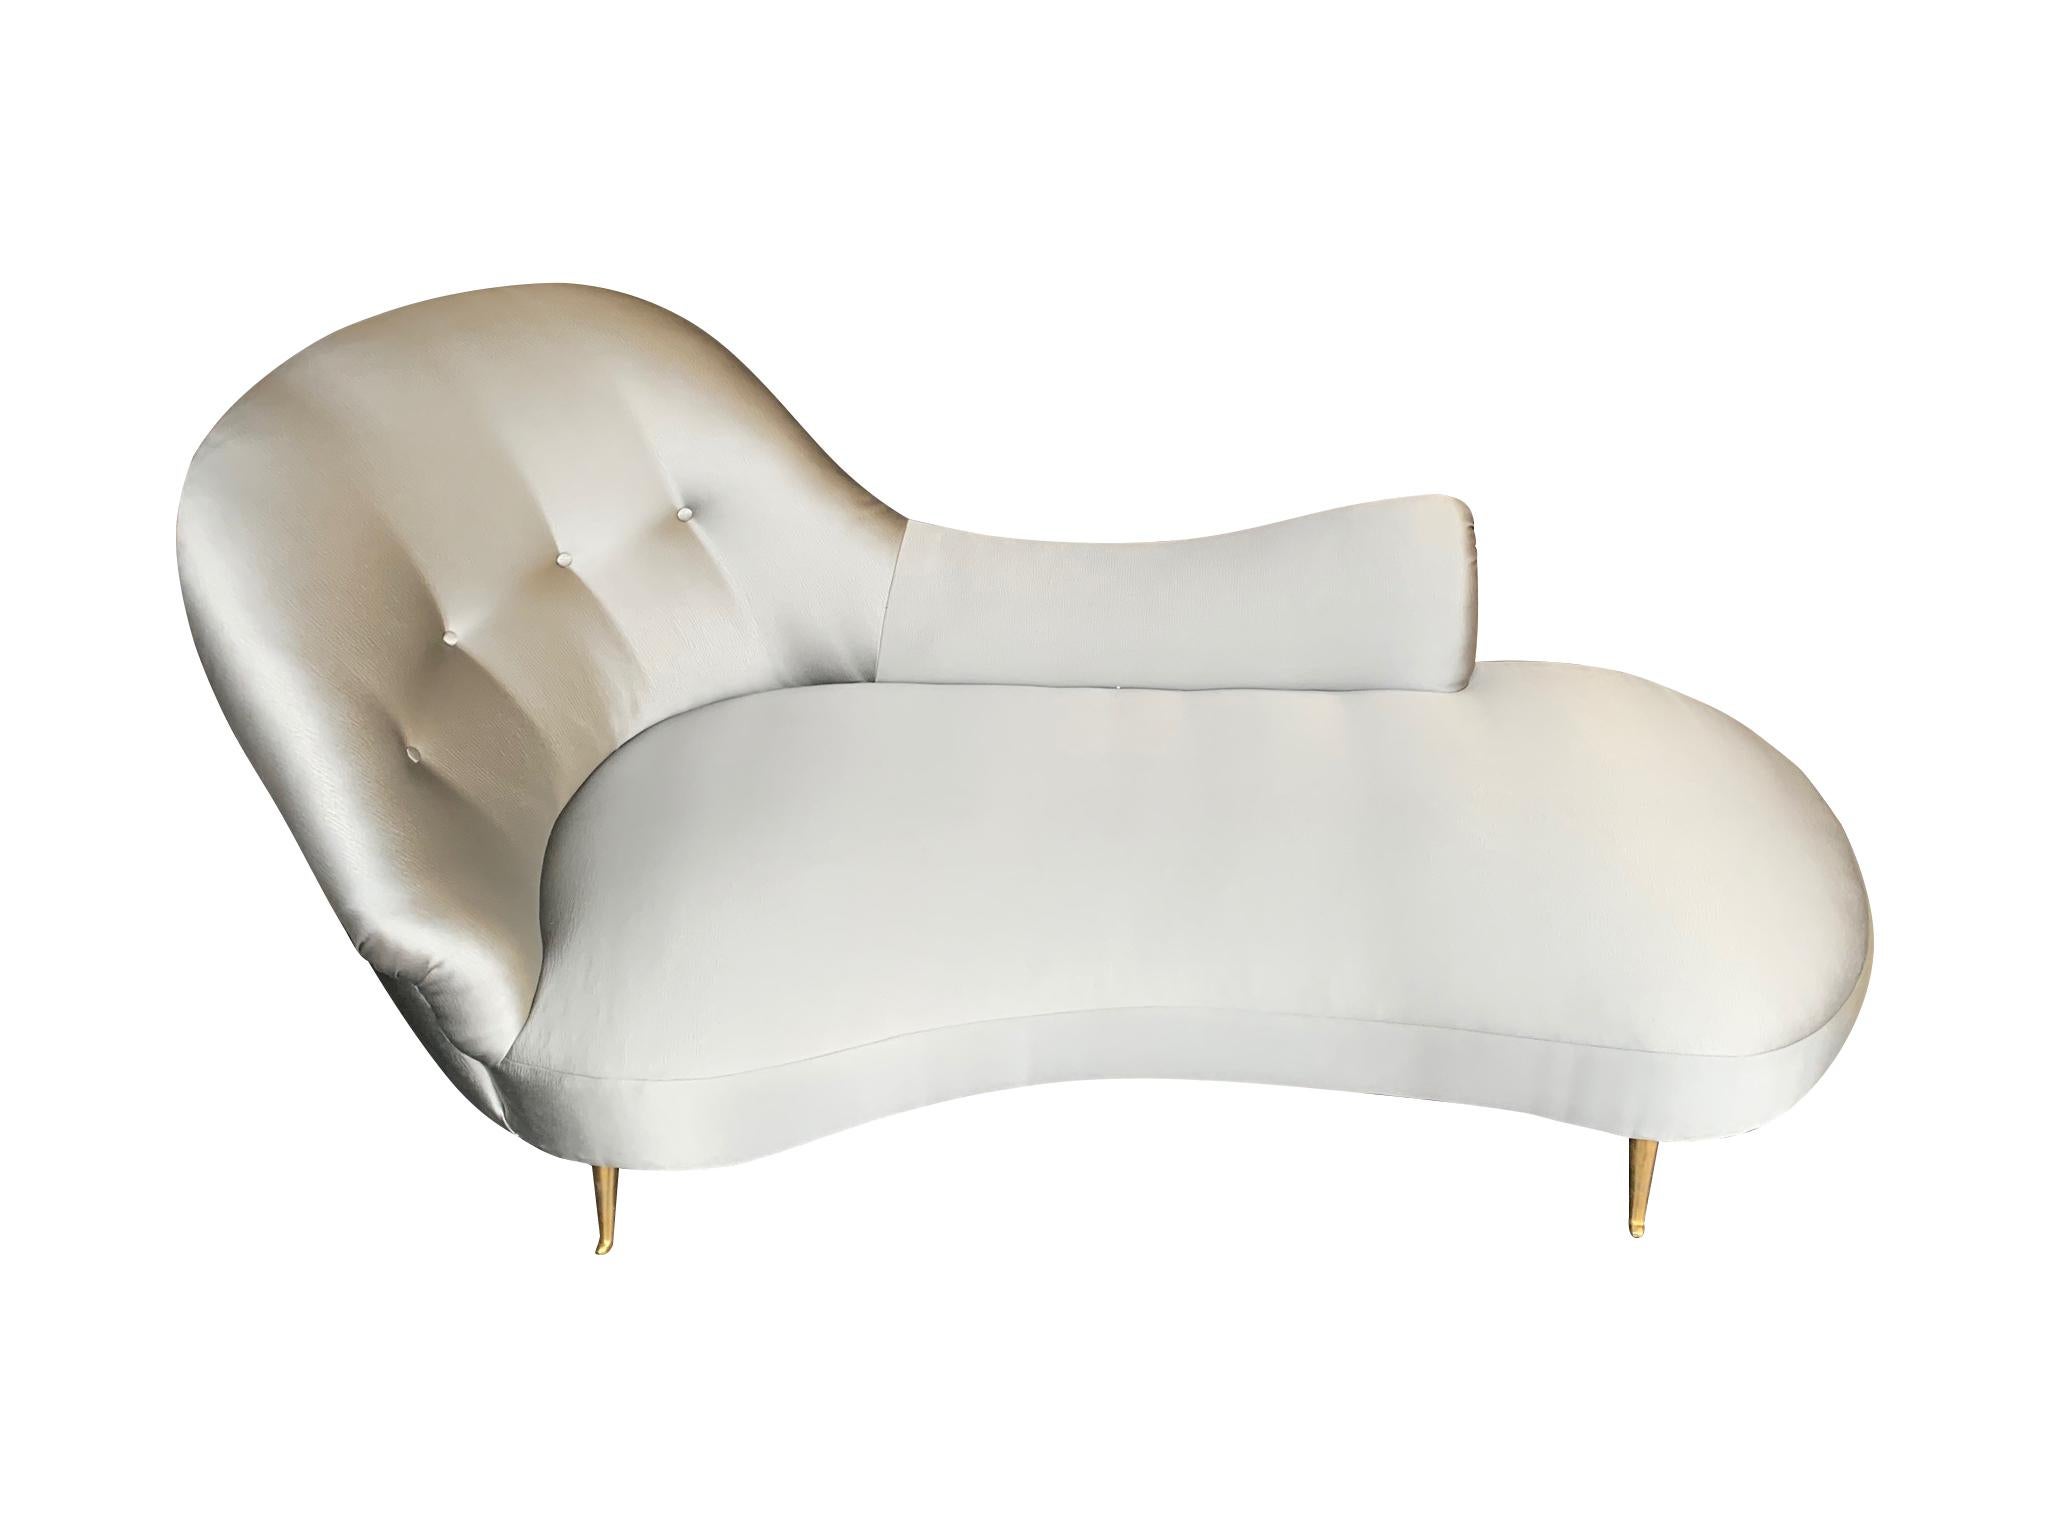 Italian Chaise Longue Upholstered in Champagne Grey Fabric with Brass Feet (Italienisch)